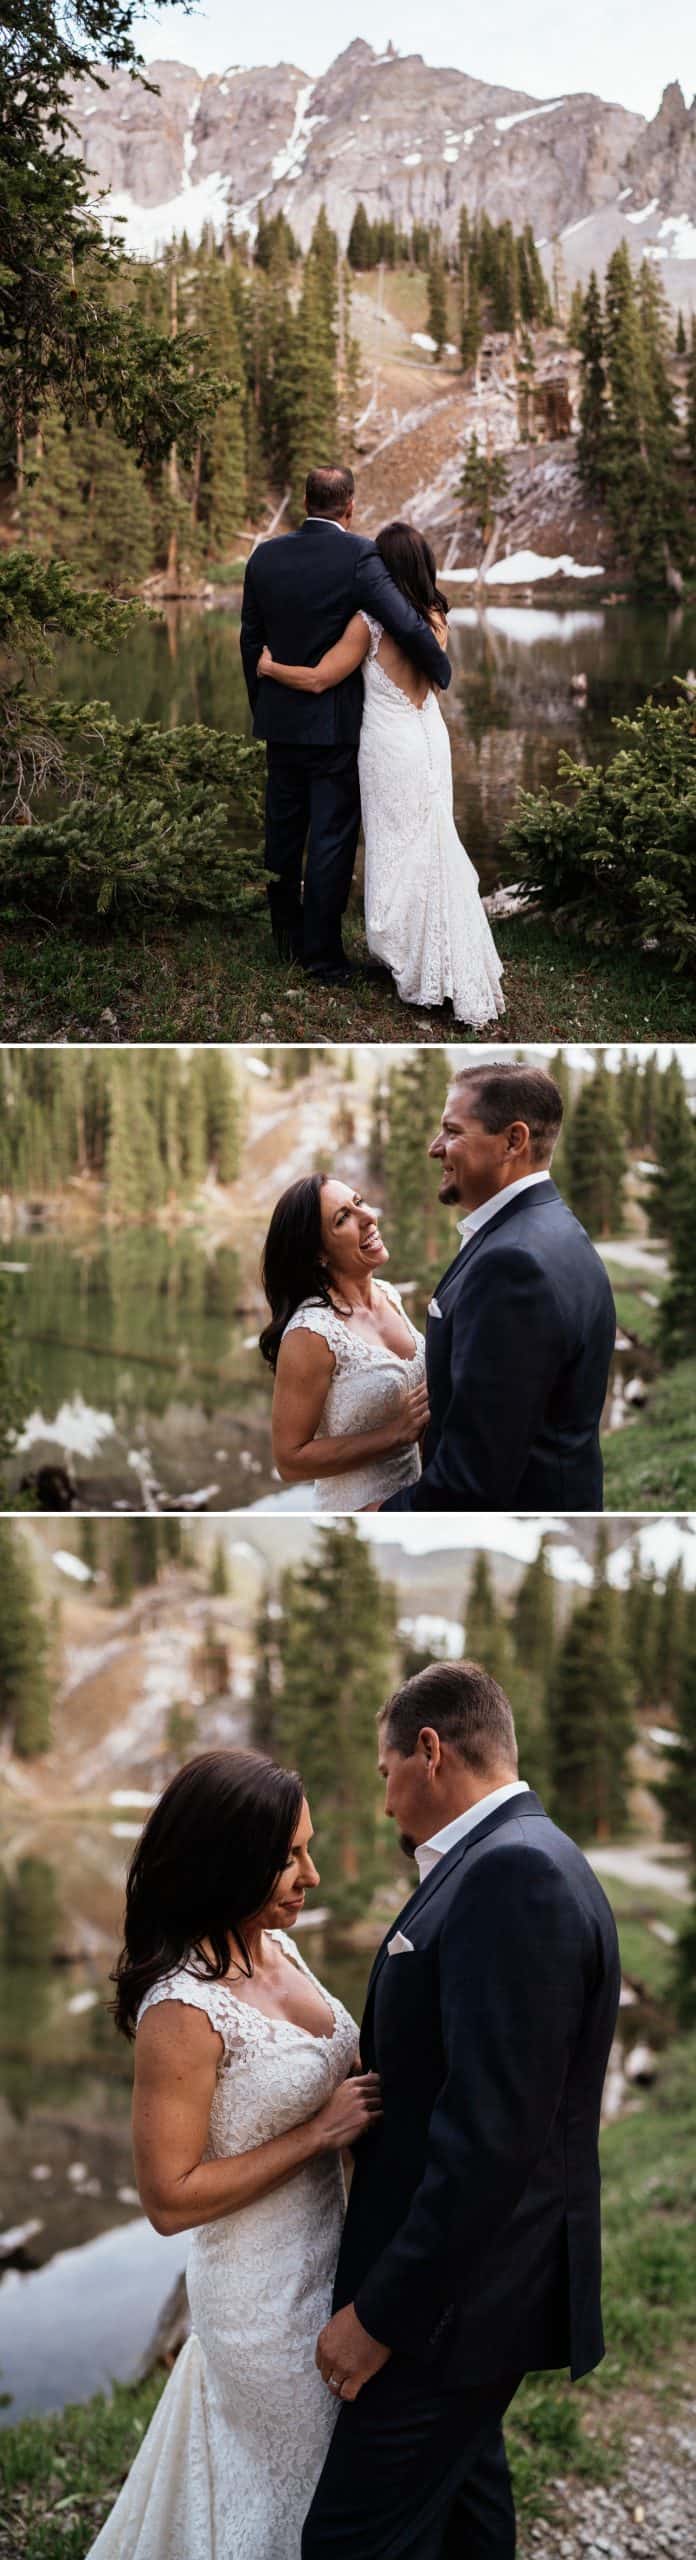 Intimate elopement at Alta Lakes Observatory in Telluride, Colorado